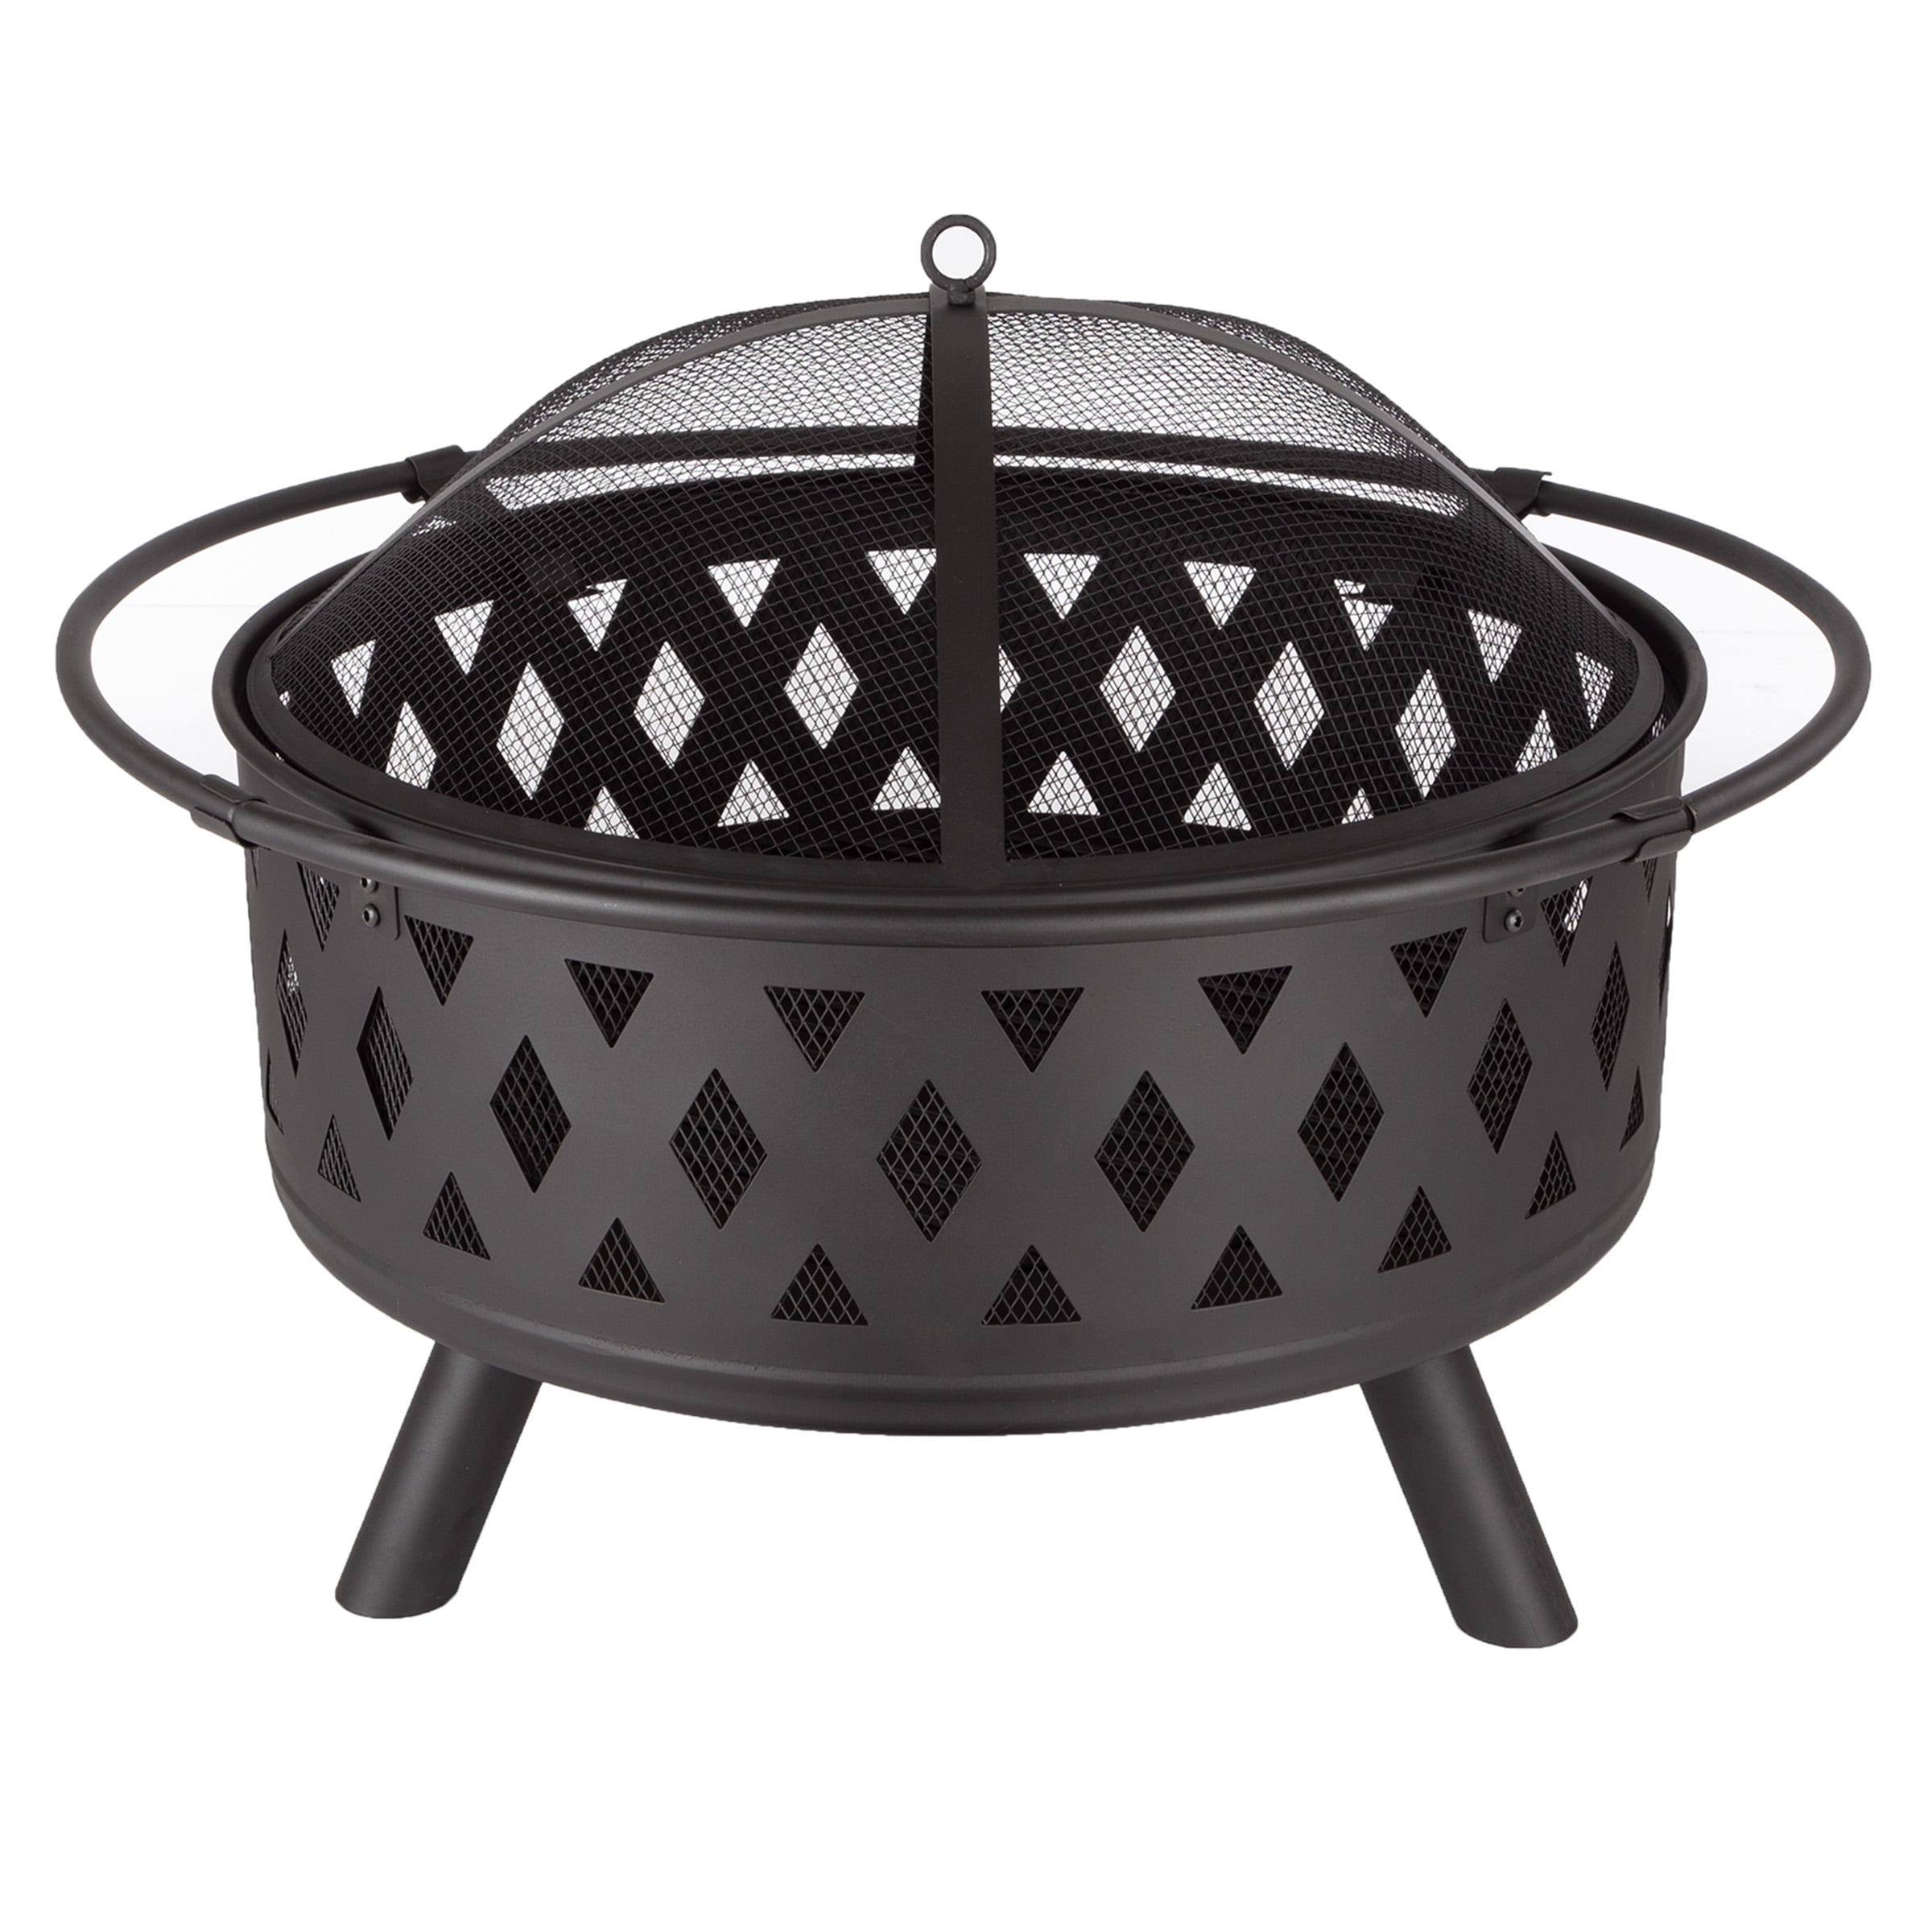 Patio Wood Burning By Pure Garden, Hampton Bay Crossfire Fire Pit